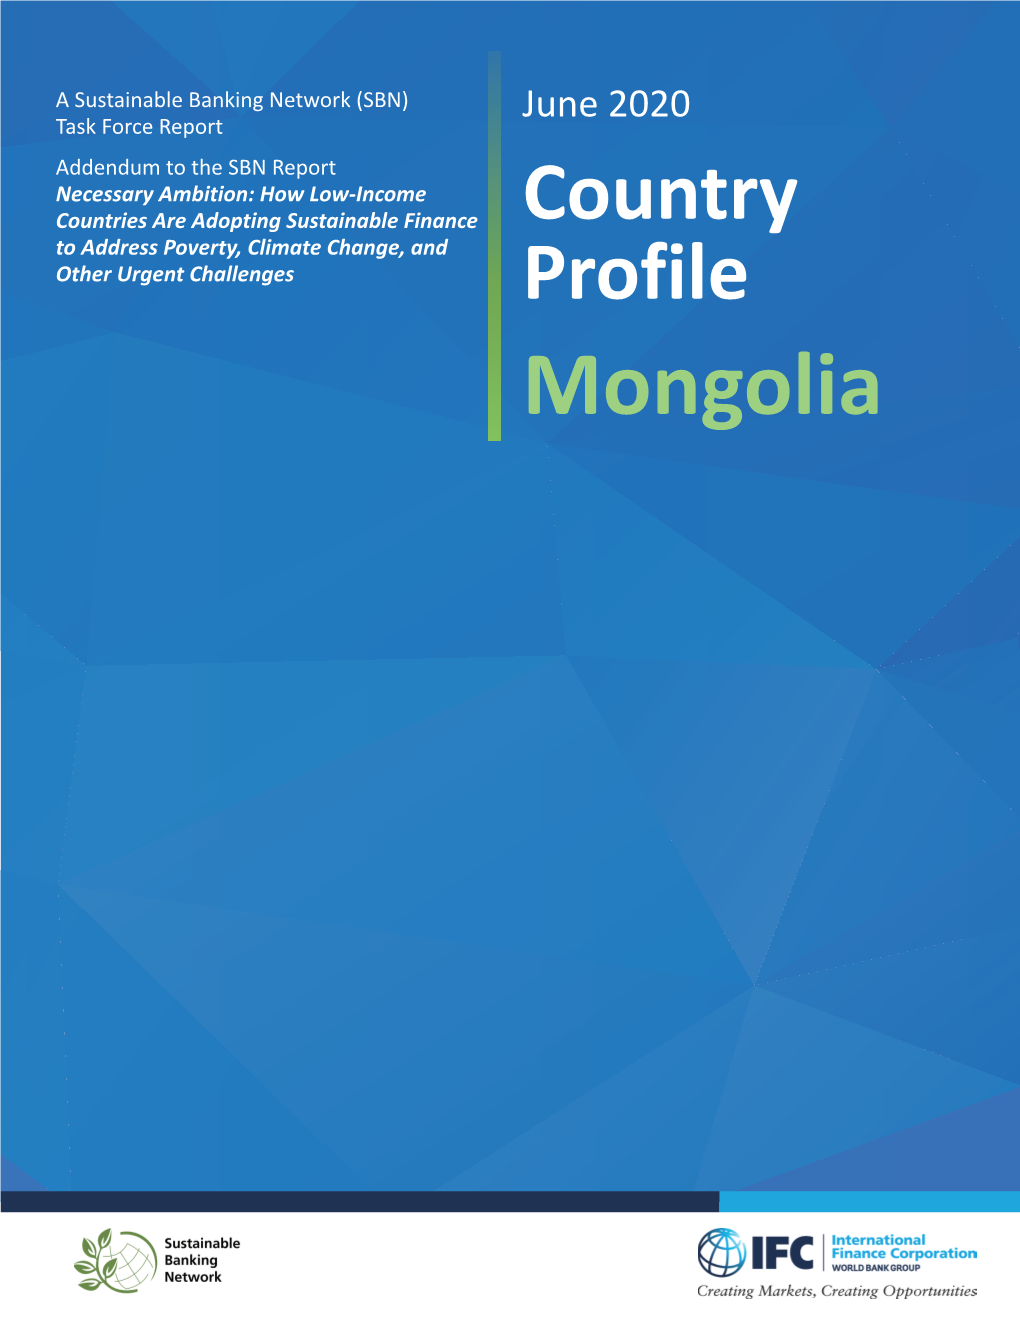 Mongolia © International Finance Corporation [2020], As the Secretariat of the Sustainable Banking Network (SBN)